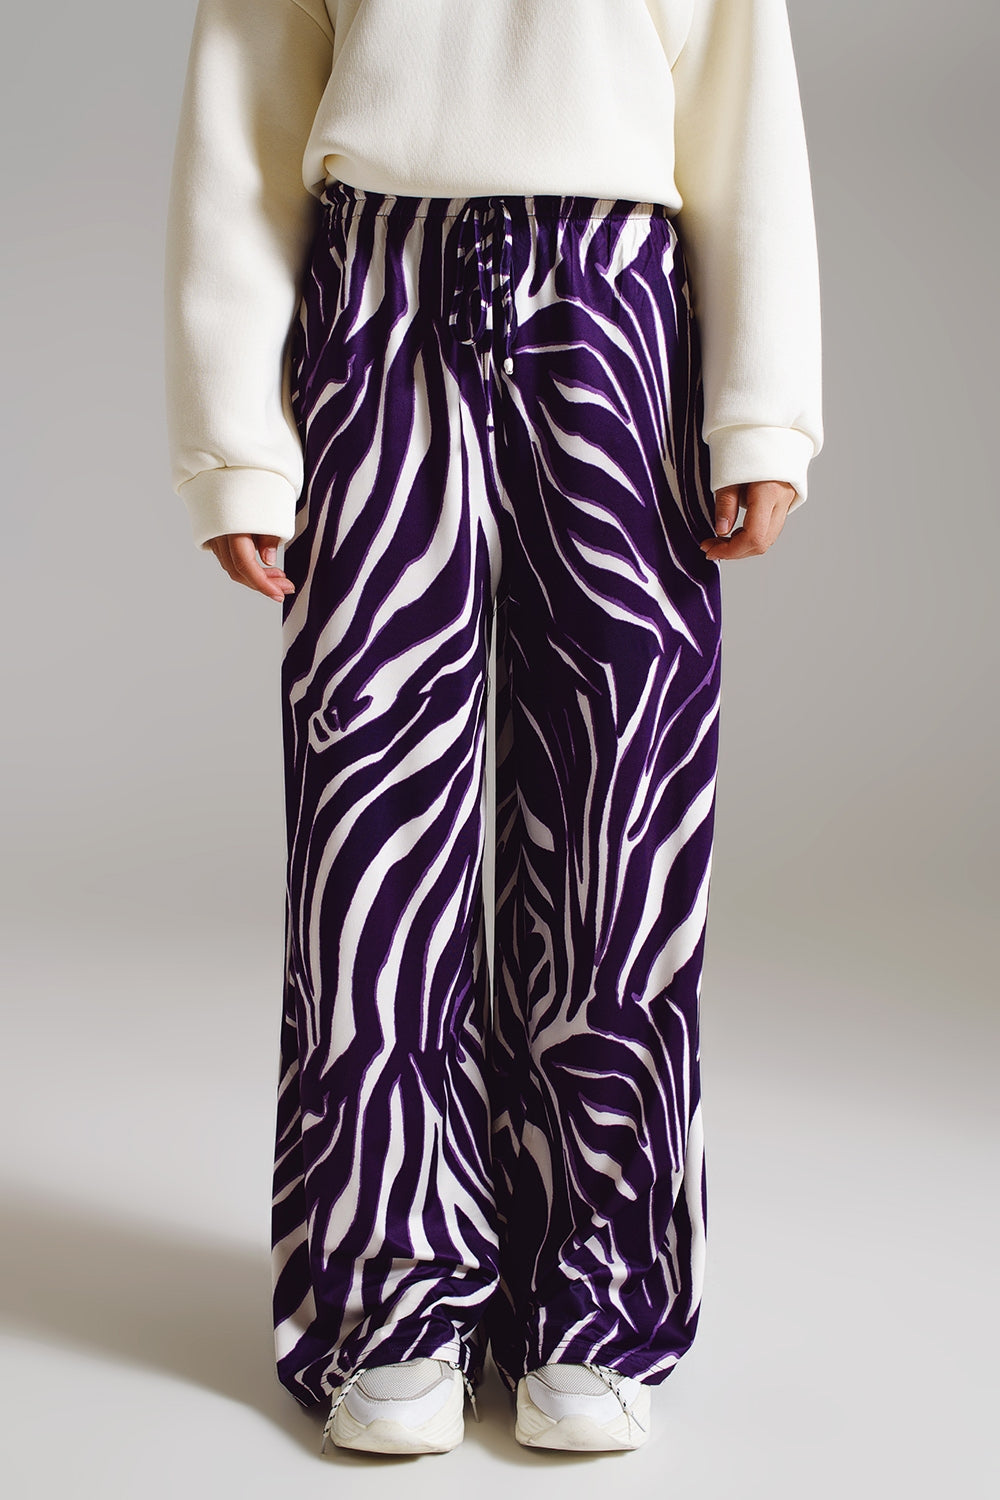 Q2 Straight Pants with zebra print in Purple and White